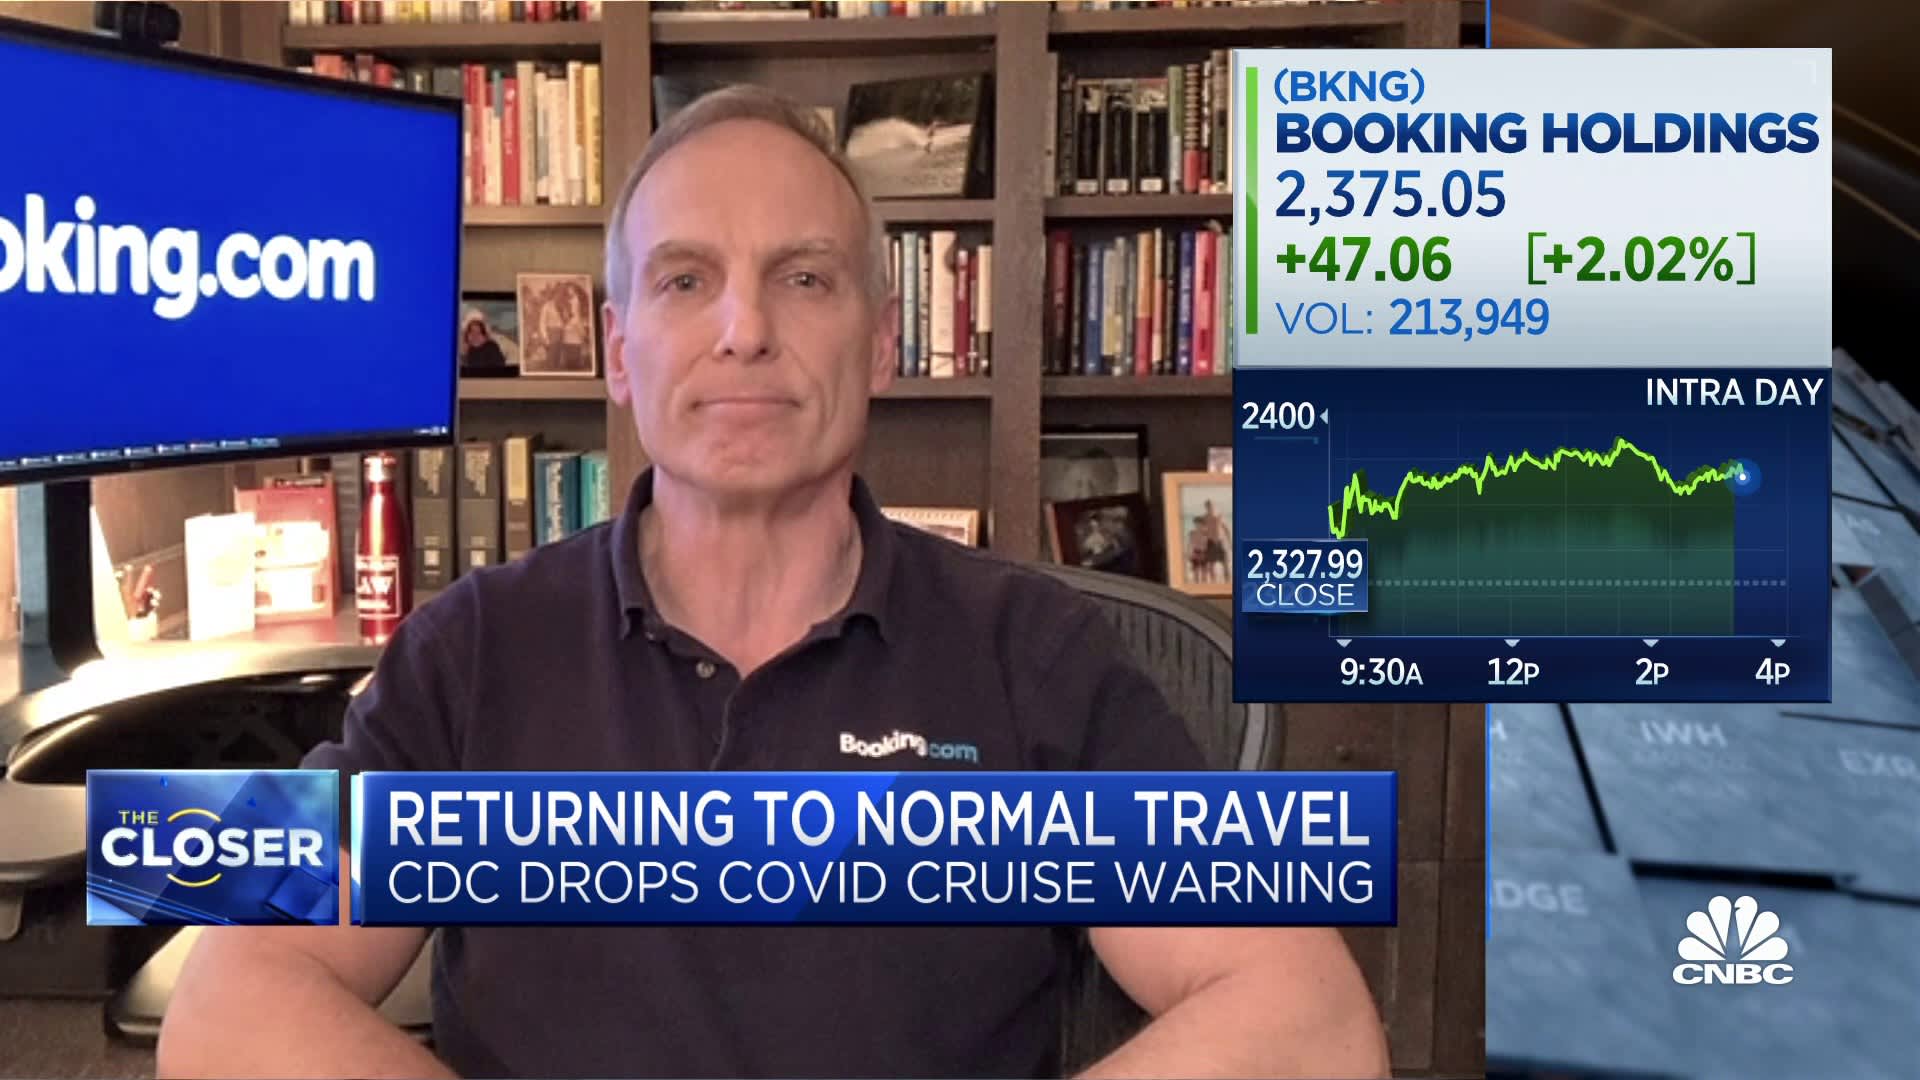 Buy your ticket now if you’re planning to take a summer trip, says Booking Holdings CEO